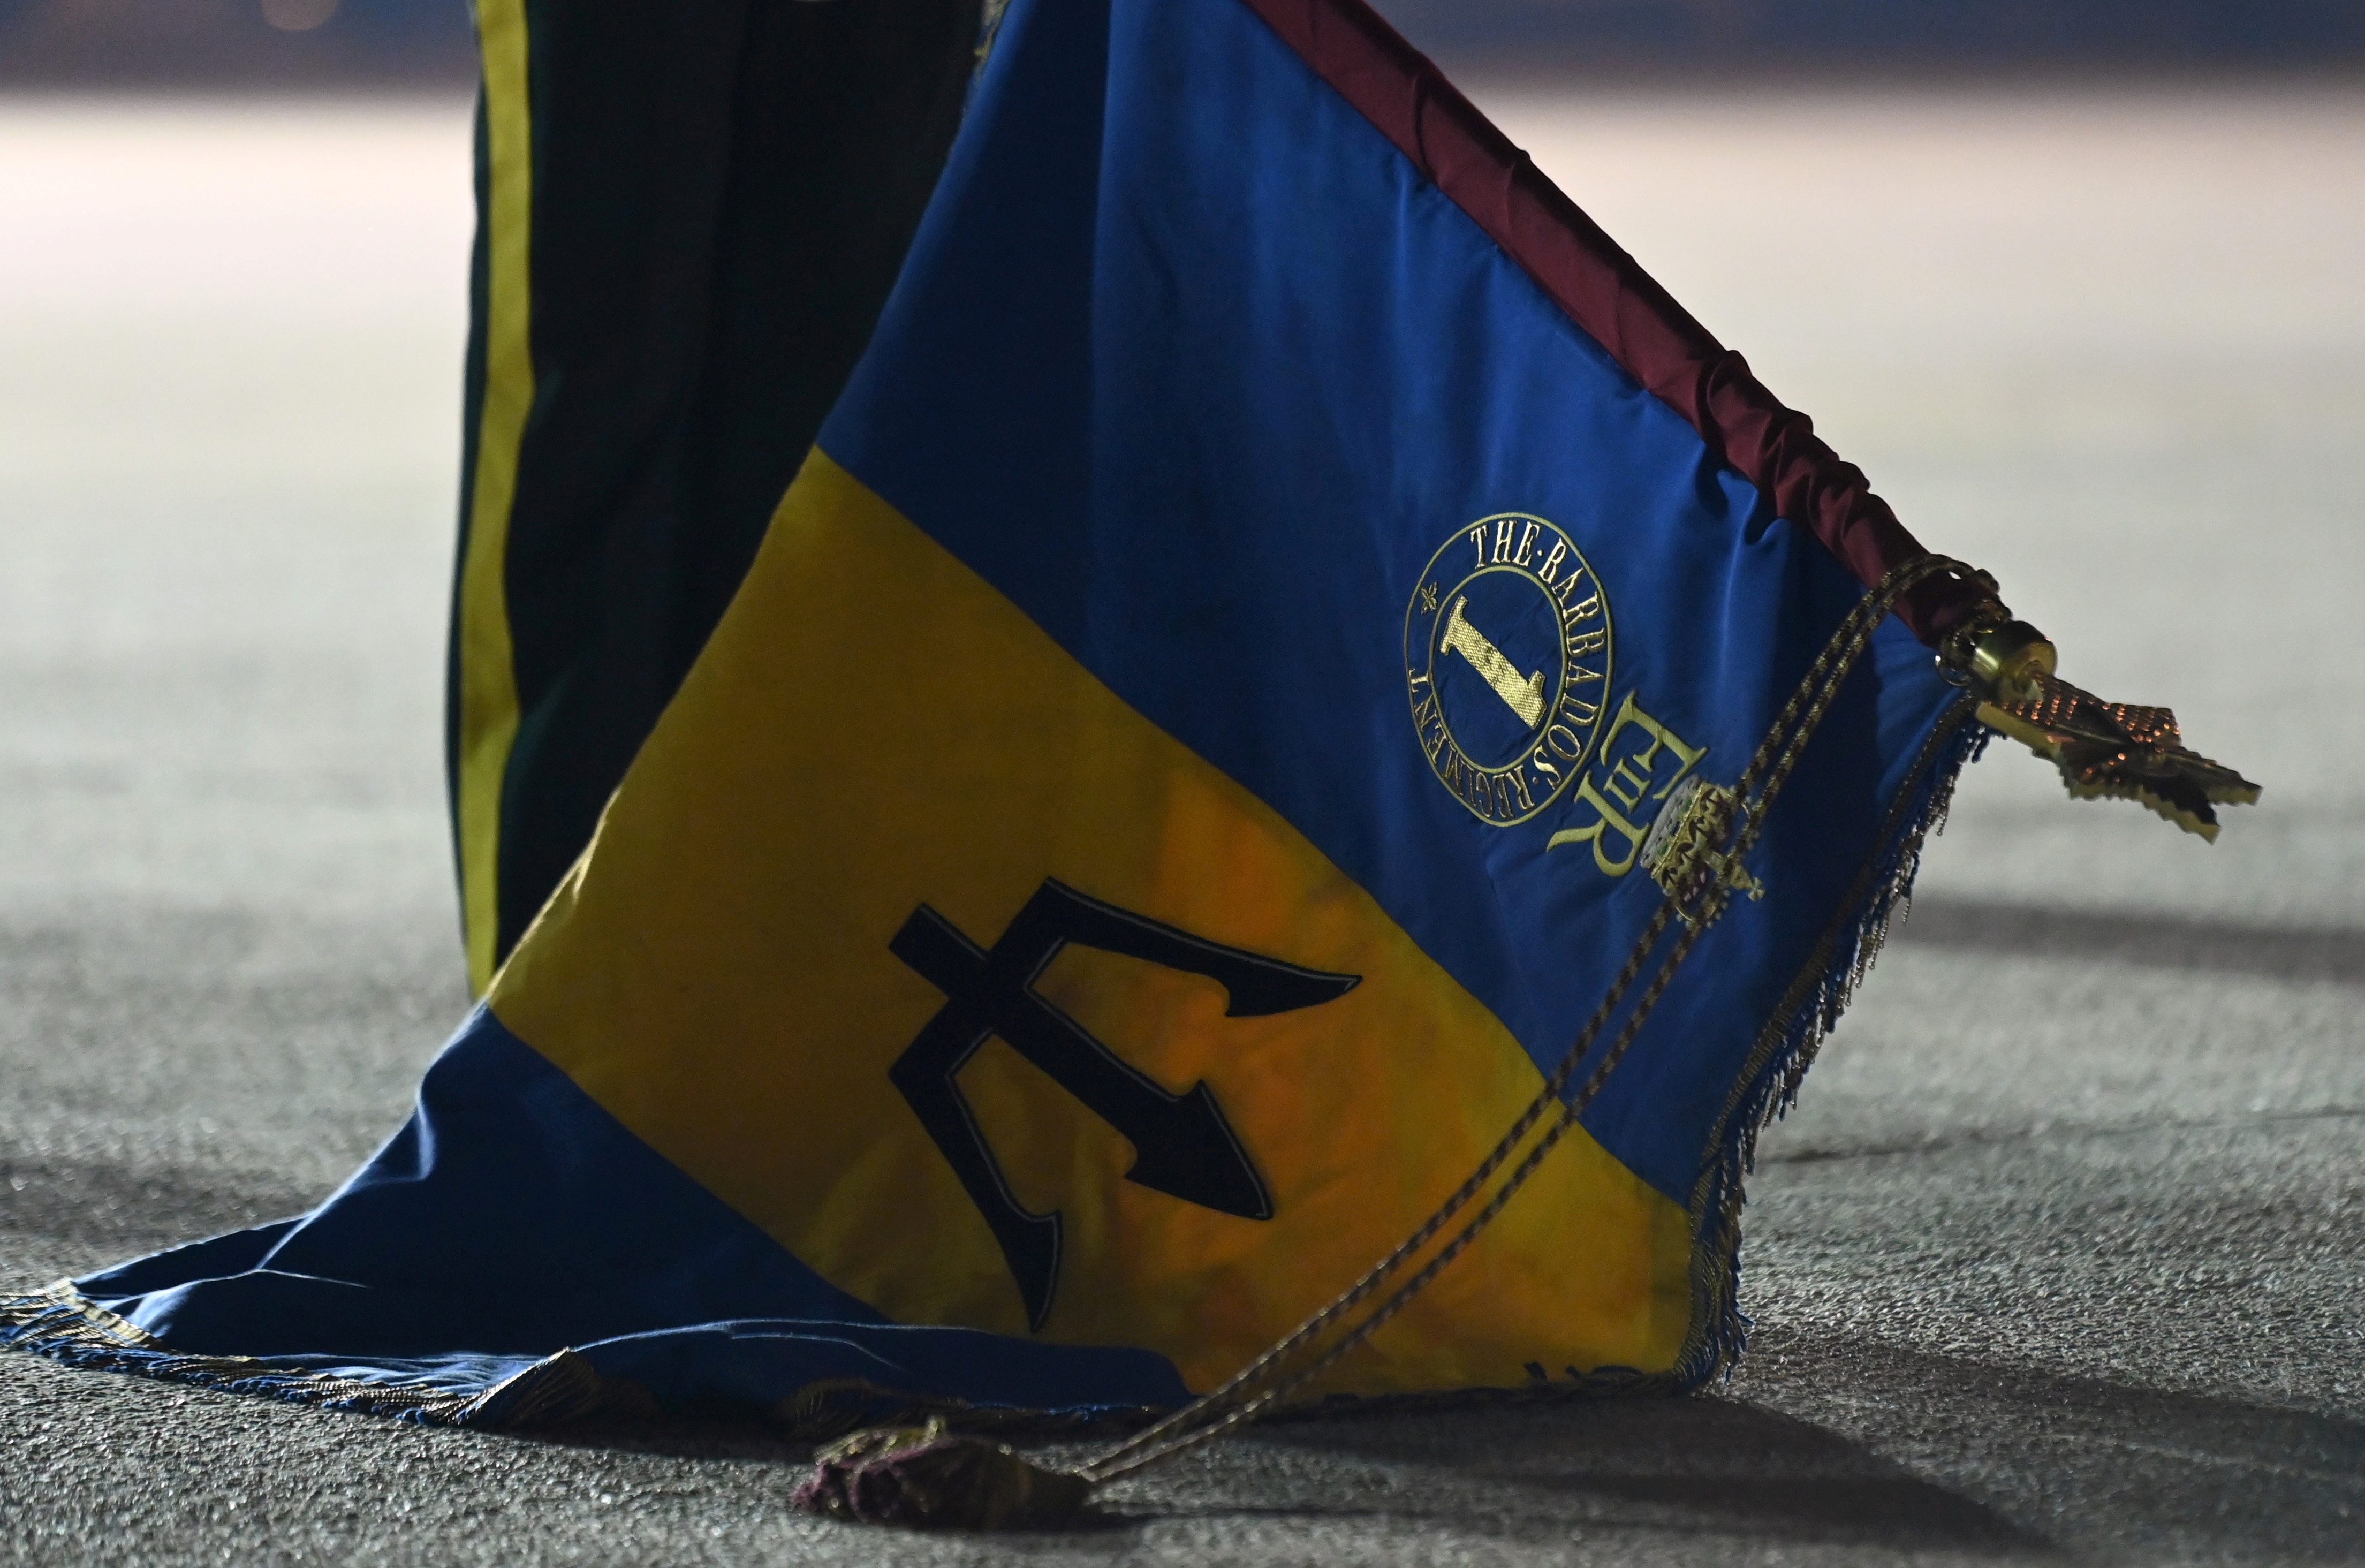 Detail including the royal crest of Britain's Queen Elizabeth is seen on a flag held by a member of the Barbados military during a Guard of Honour as Britain's Prince Charles arrives at Grantley Adams Airport to take part in events to mark the Caribbean island's transition to a birth of a new republic, Bridgetown, Barbados, November 28, 2021. REUTERS/Toby Melville